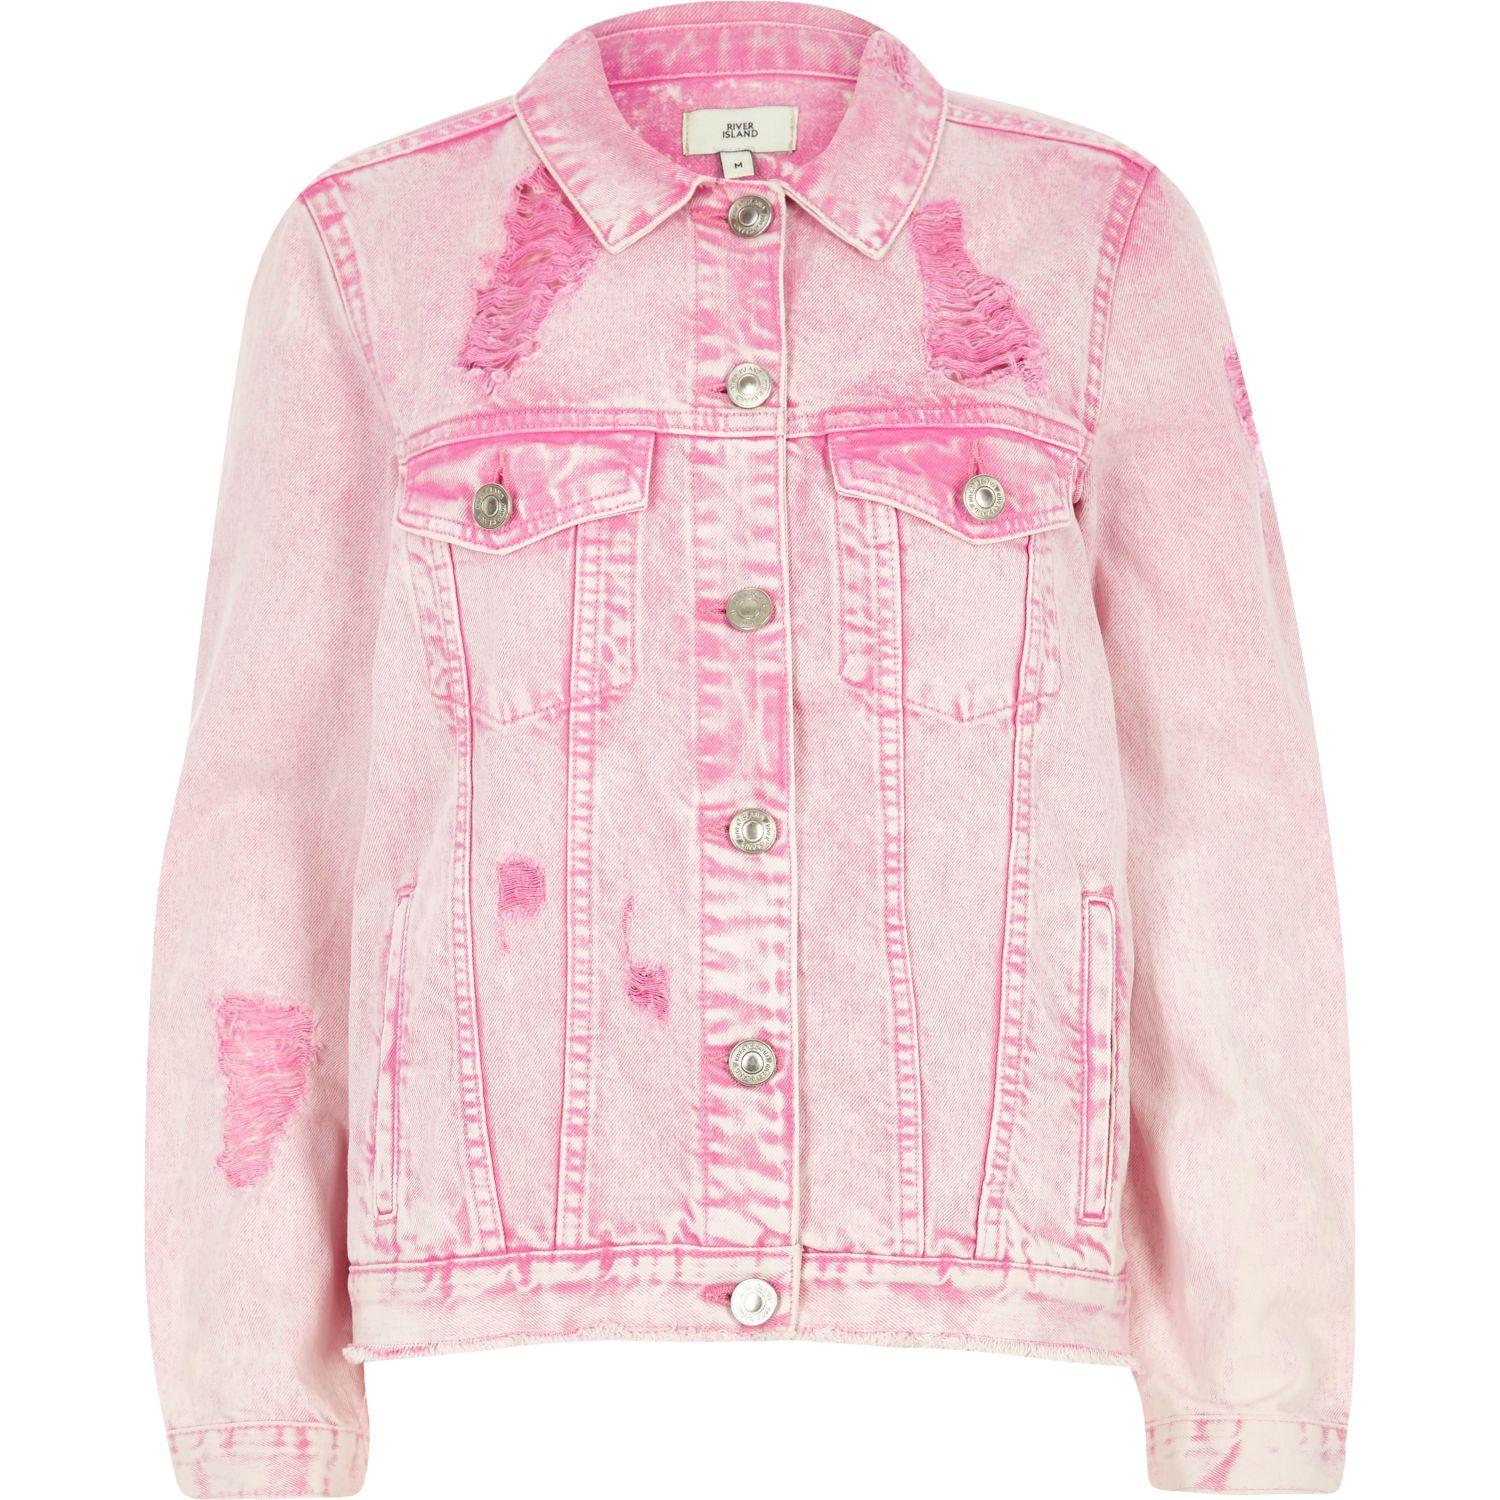 Lyst - River Island Pink Acid Wash Ripped Oversized Denim Jacket in Pink